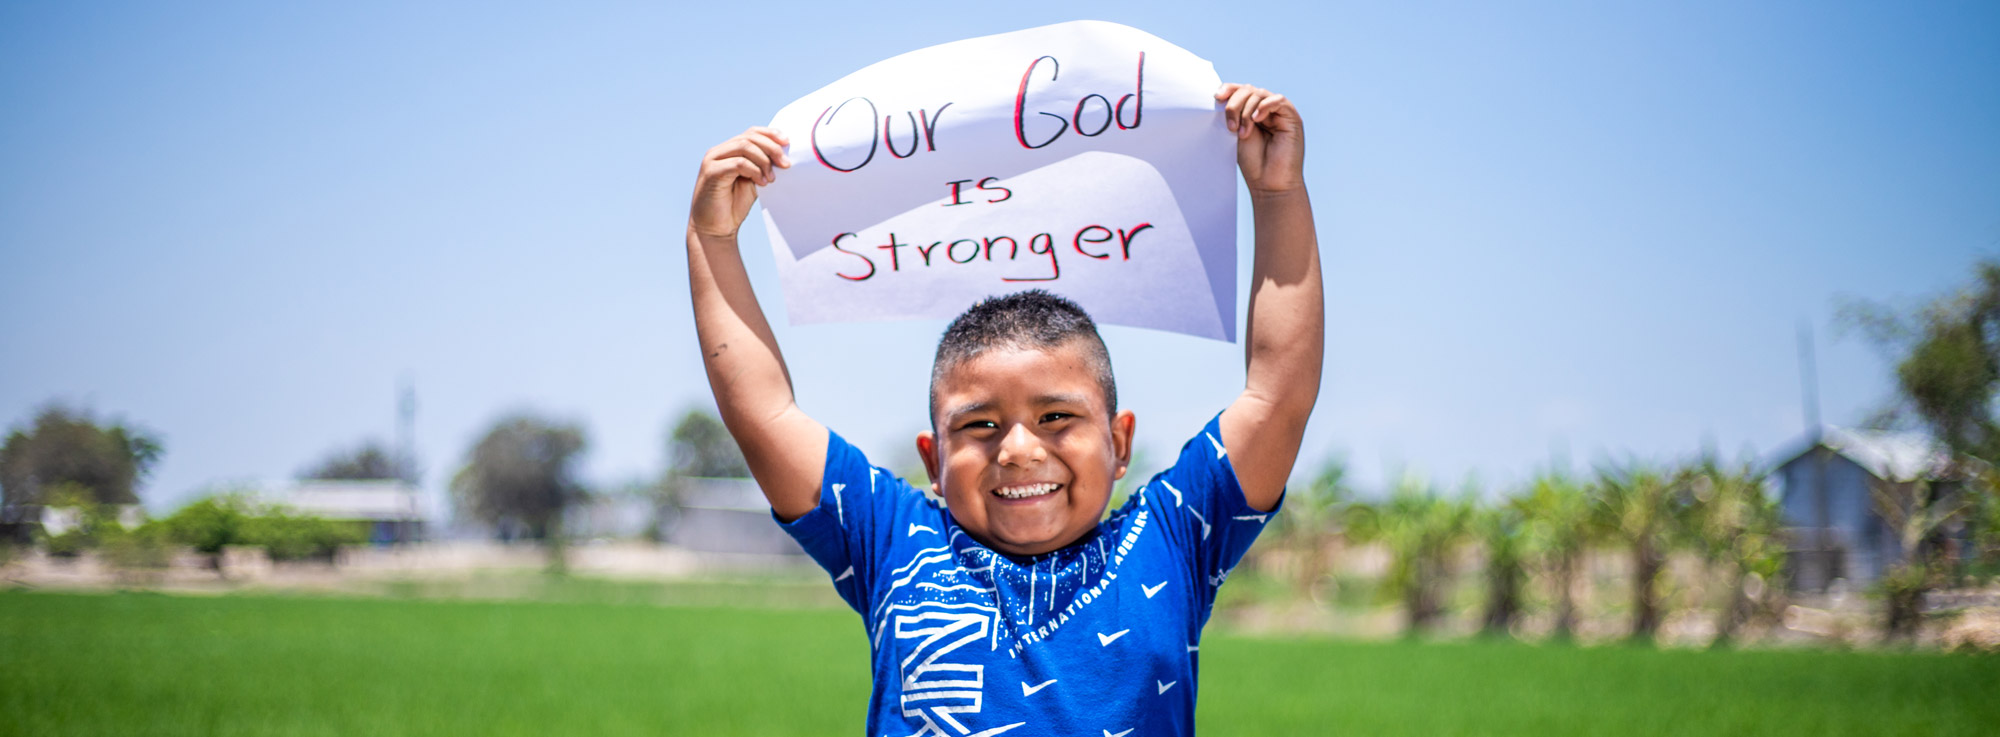 Little boy holding up "our God is stronger" sign